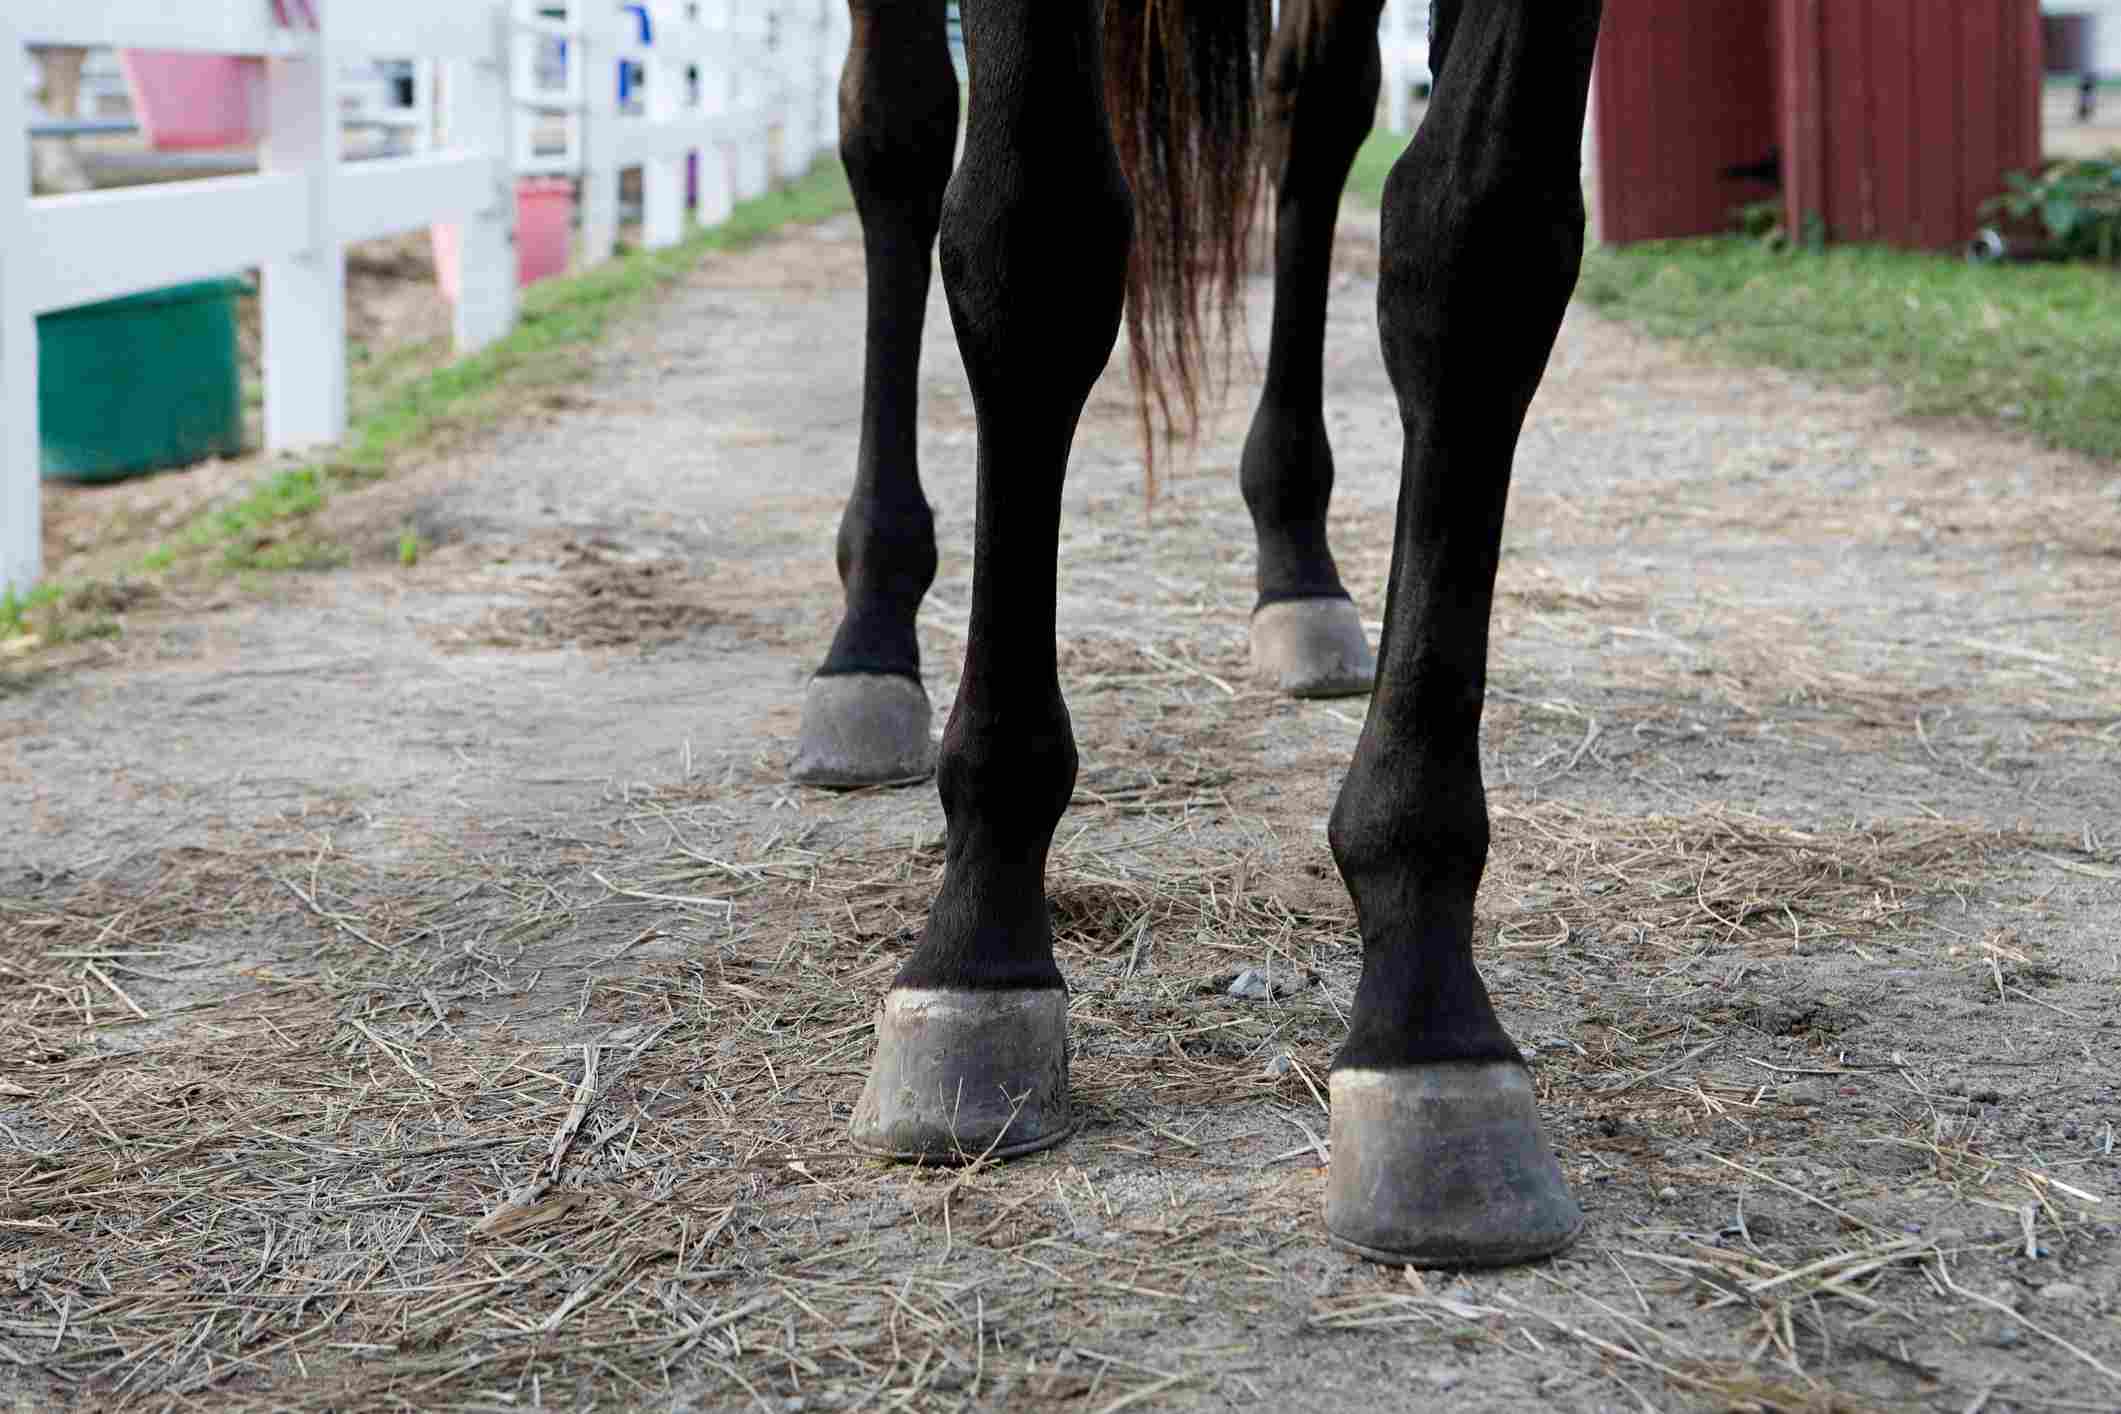 A close-up of a horse's hooves